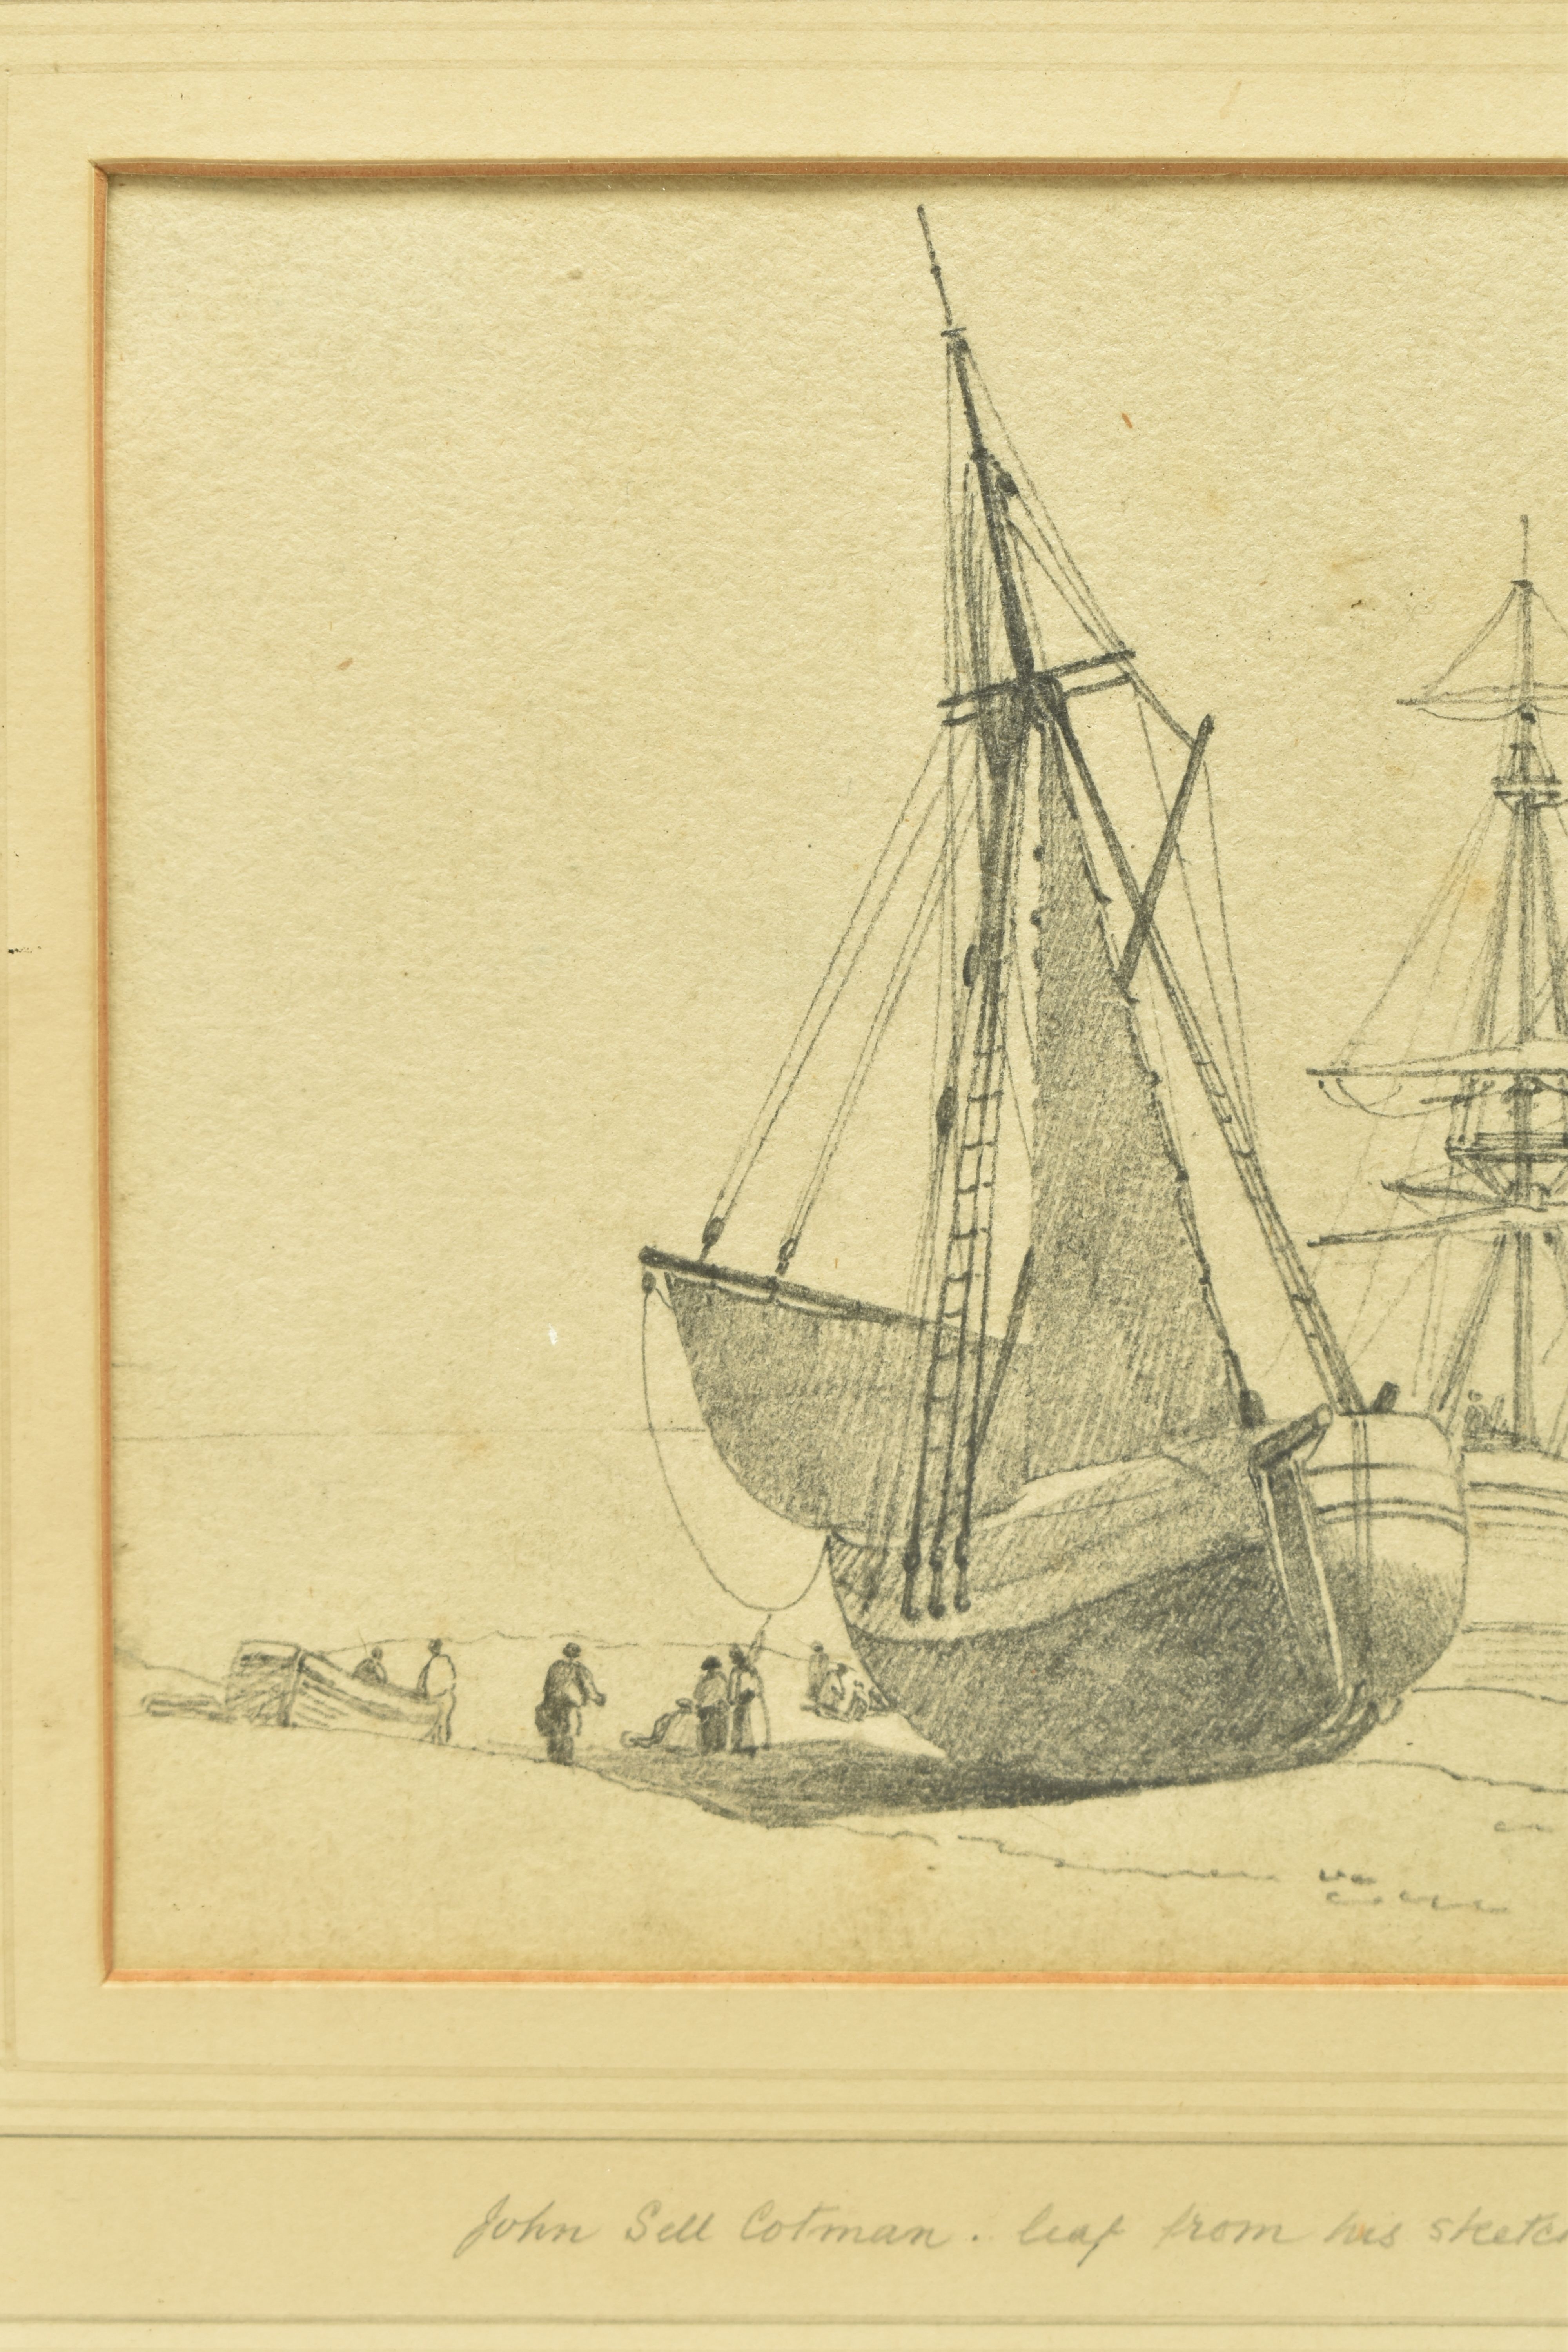 John Sell Cotman  BOATS - A LEAF FROM HIS SKETCH BOOK (1935